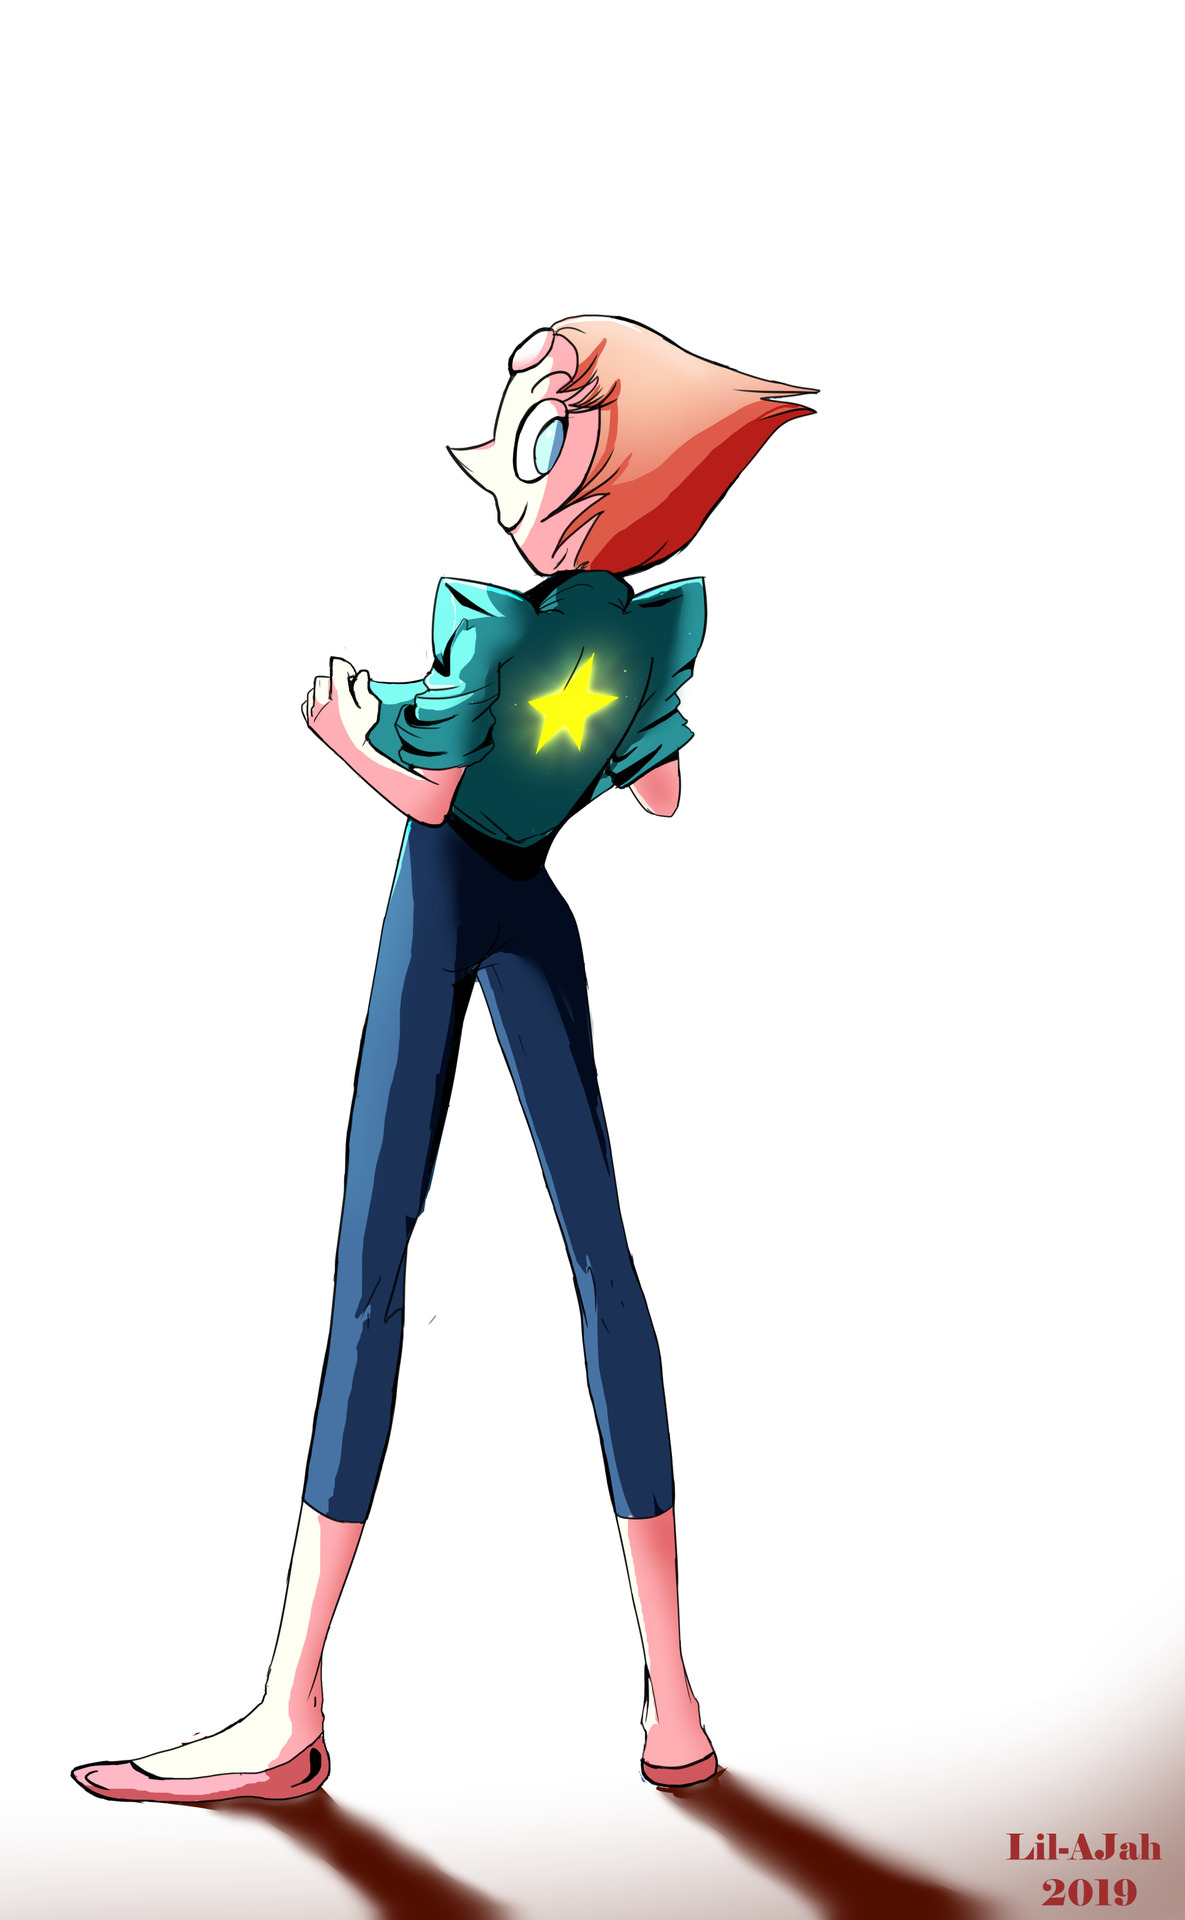 I finally caught up to episodes and the finale of change your mind. I love all the gem new form especially pearl. Did this base off on memories not too bad.